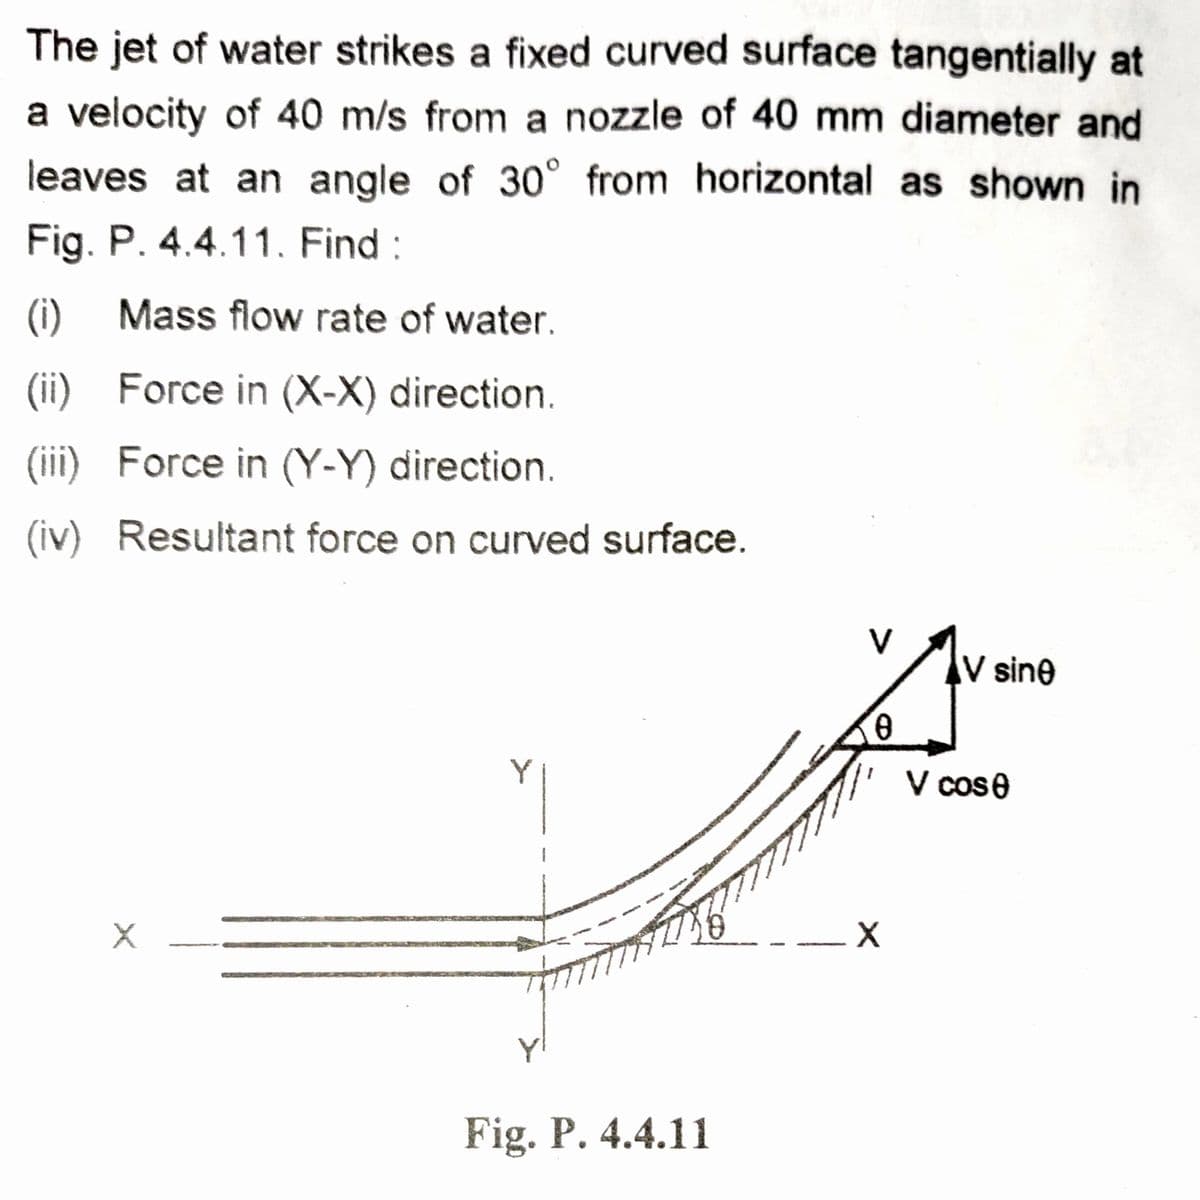 The jet of water strikes a fixed curved surface tangentially at
a velocity of 40 m/s from a nozzle of 40 mm diameter and
leaves at an angle of 30° from horizontal as shown in
Fig. P. 4.4.11. Find :
(i)
Mass flow rate of water.
(ii) Force in (X-X) direction.
(iii) Force in (Y-Y) direction.
(iv) Resultant force on curved surface.
V sine
V cose
Fig. P. 4.4.11
